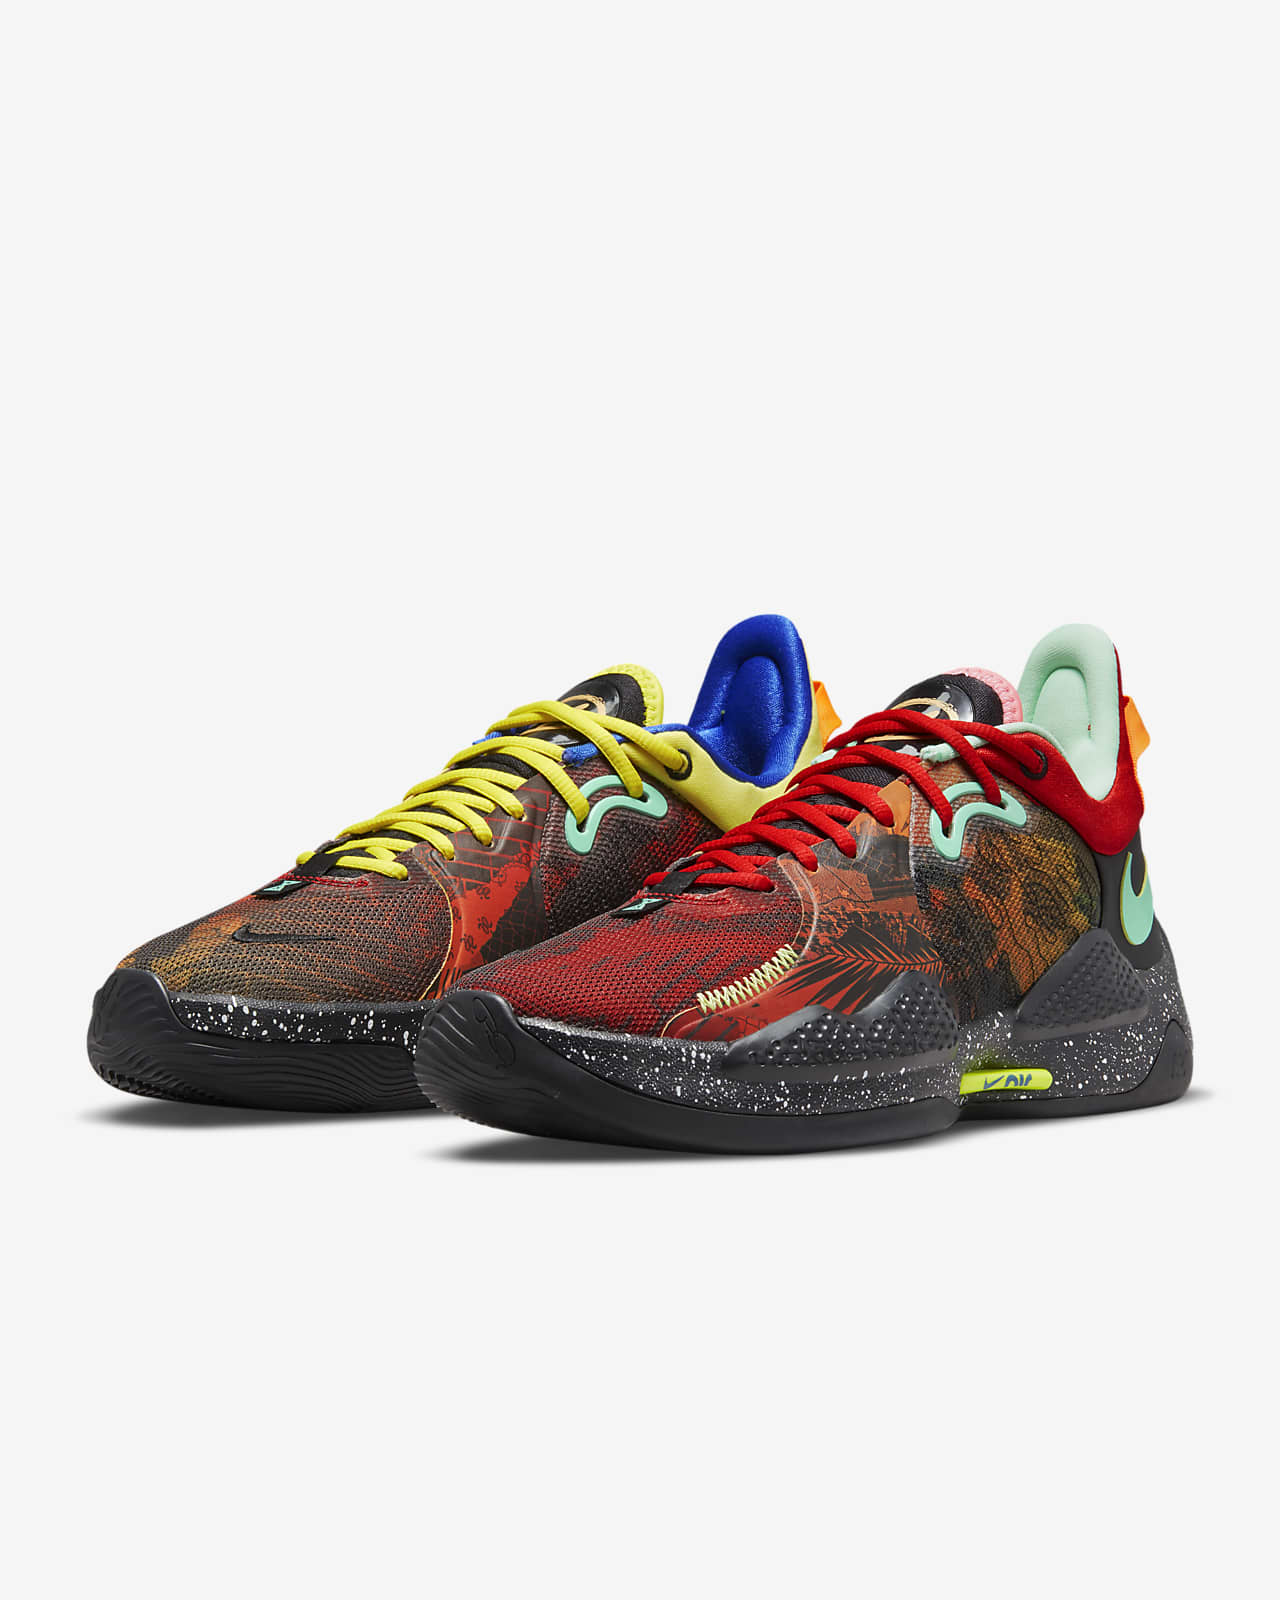 PG 5 EP Basketball Shoes. Nike IN